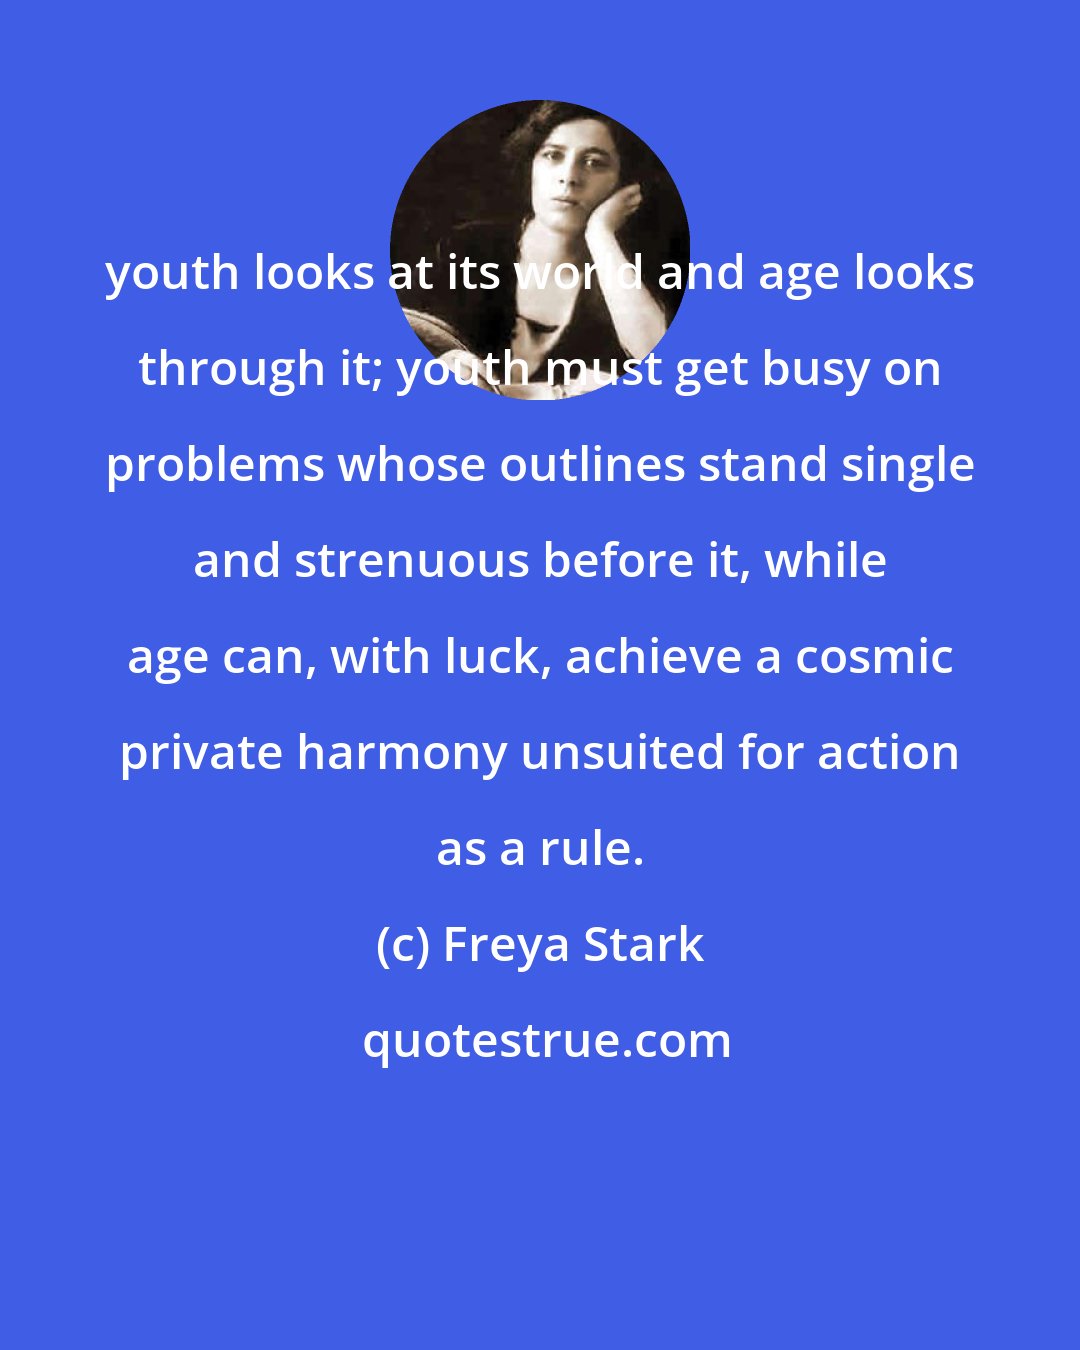 Freya Stark: youth looks at its world and age looks through it; youth must get busy on problems whose outlines stand single and strenuous before it, while age can, with luck, achieve a cosmic private harmony unsuited for action as a rule.